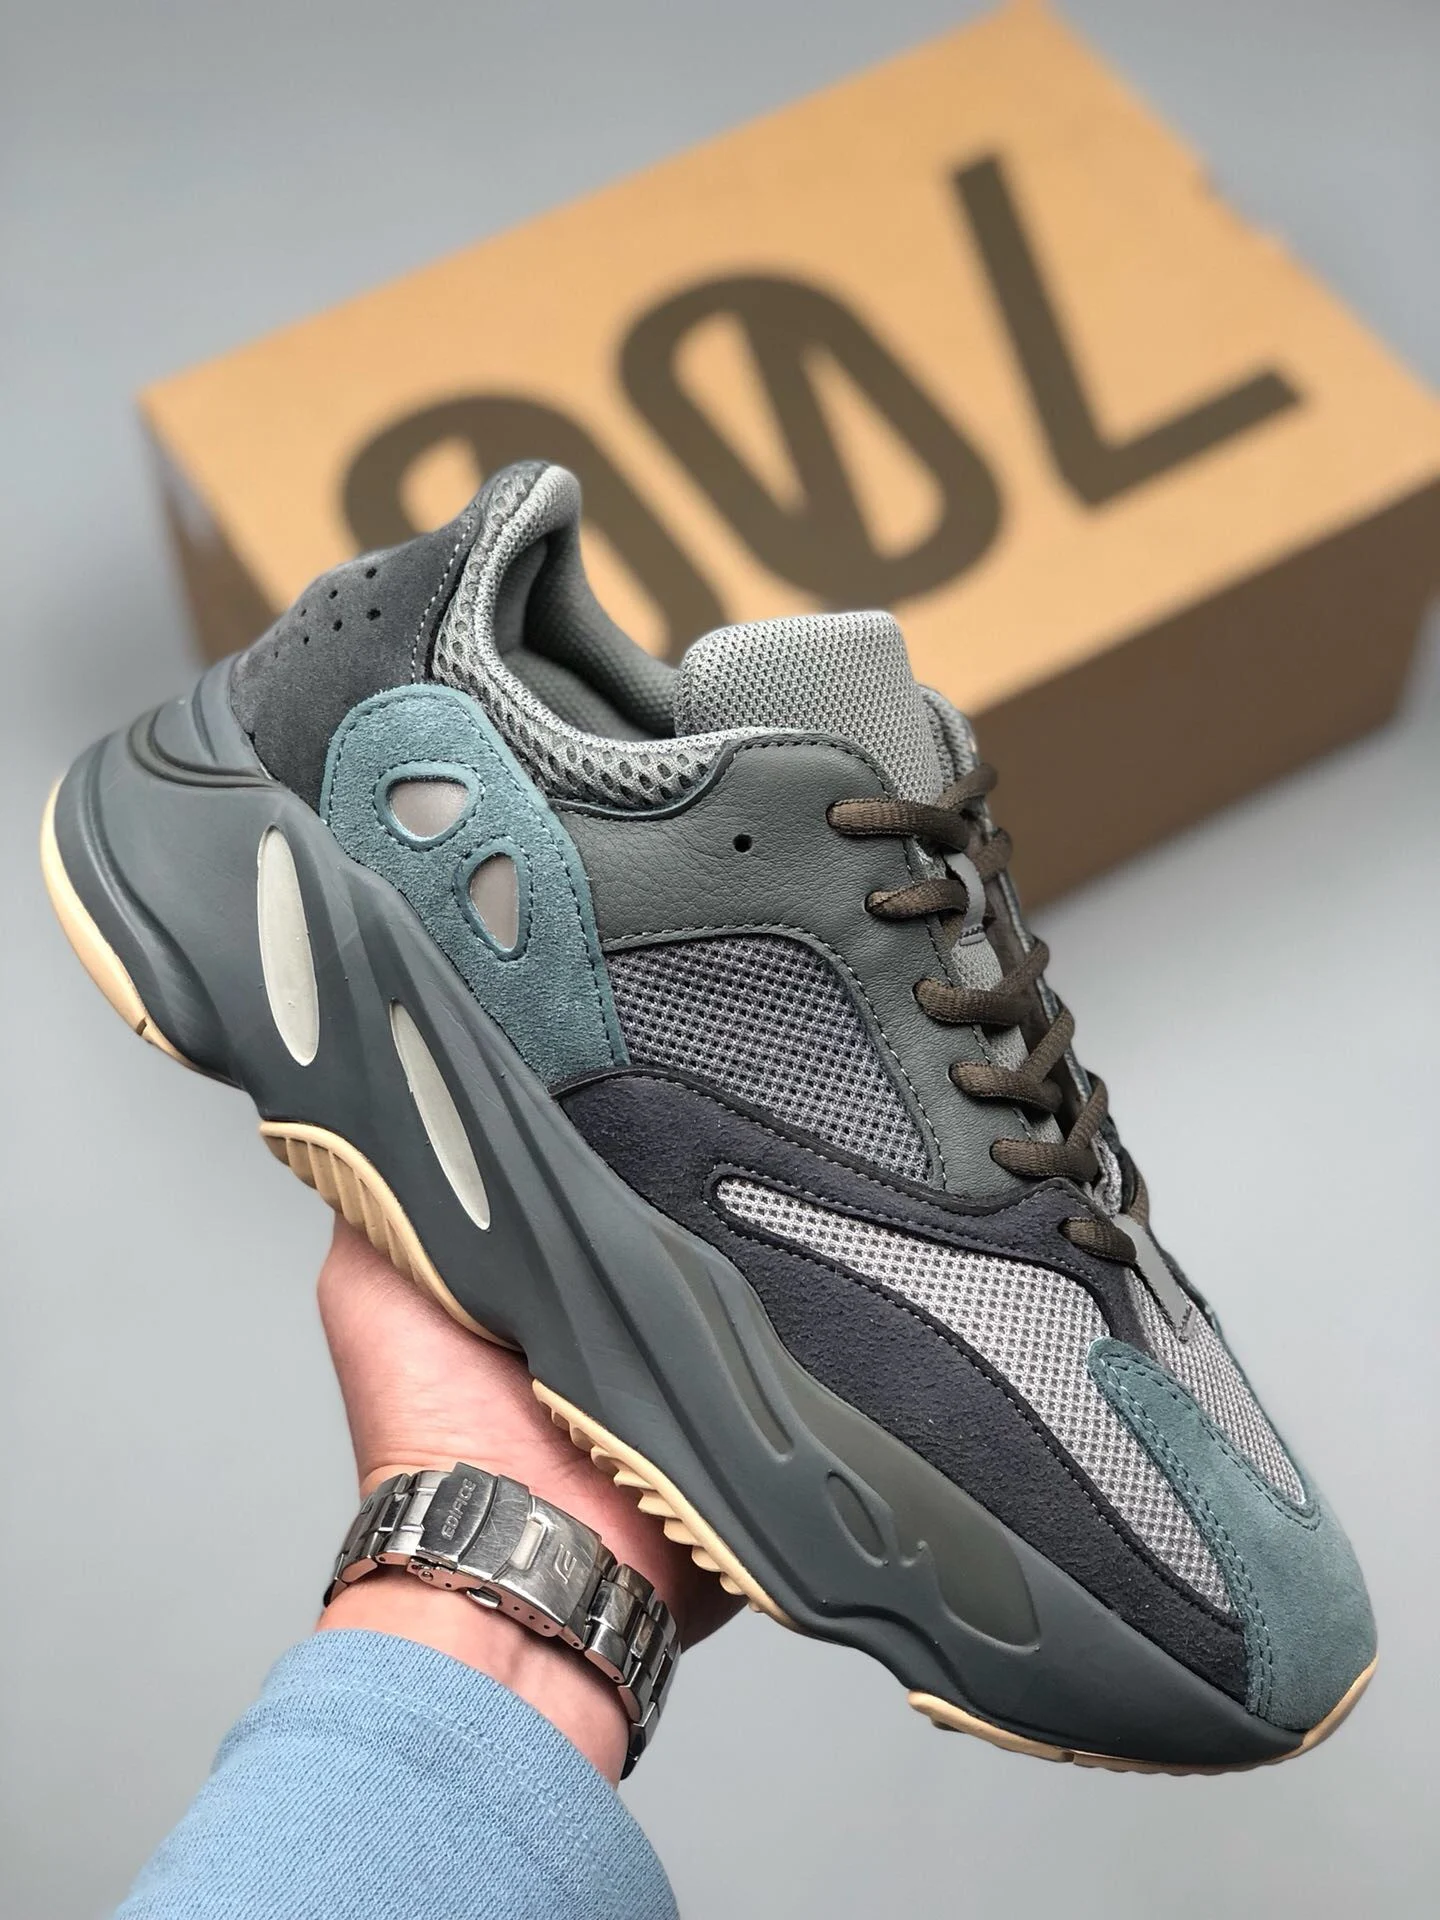 Adidas Yeezy Boost 700 Teal Blue FW2499 For Sale